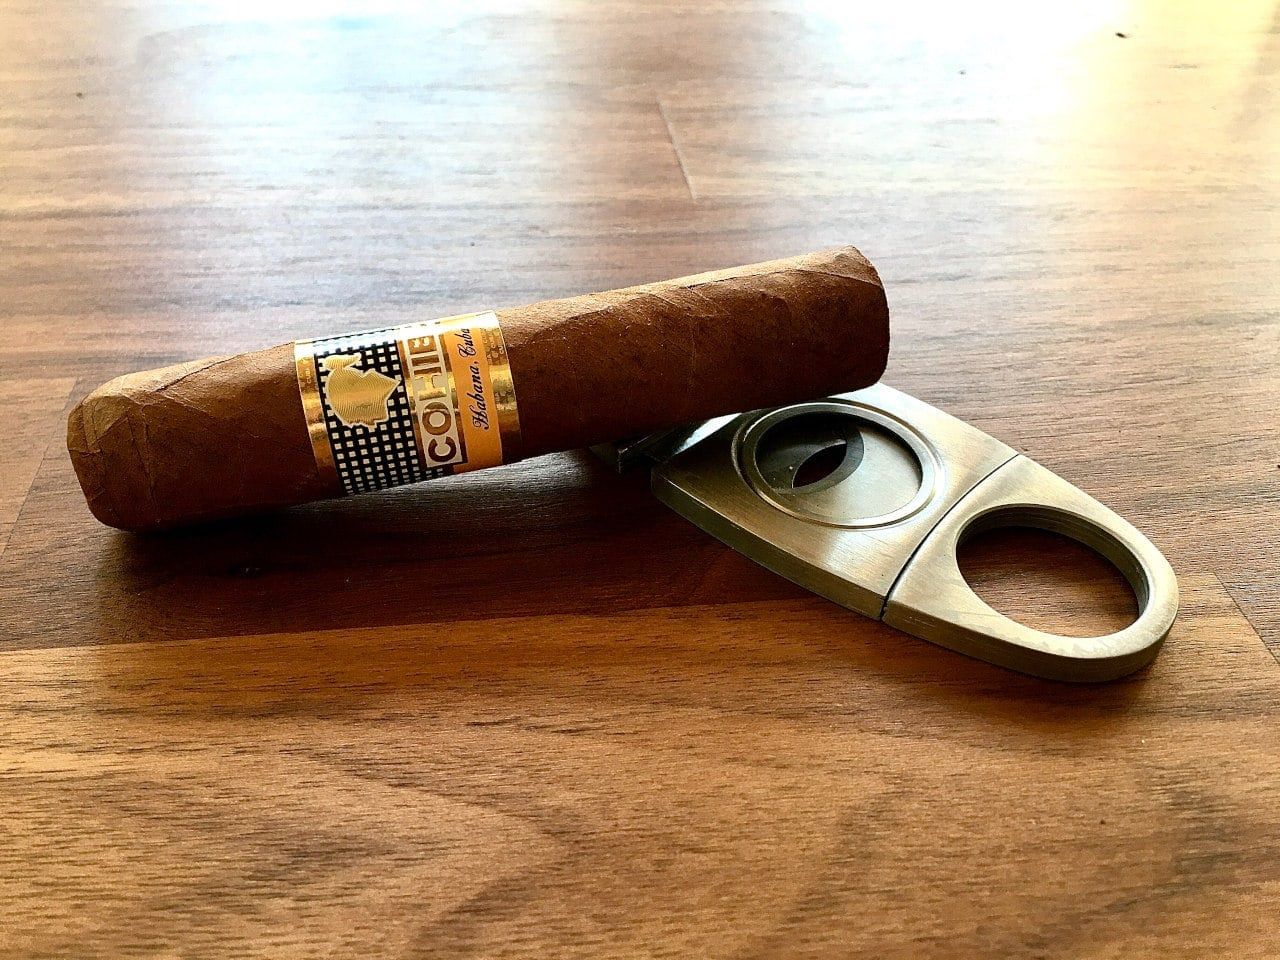 Stainles Steel Cutter And Cohiba Best Luxury Website 2021